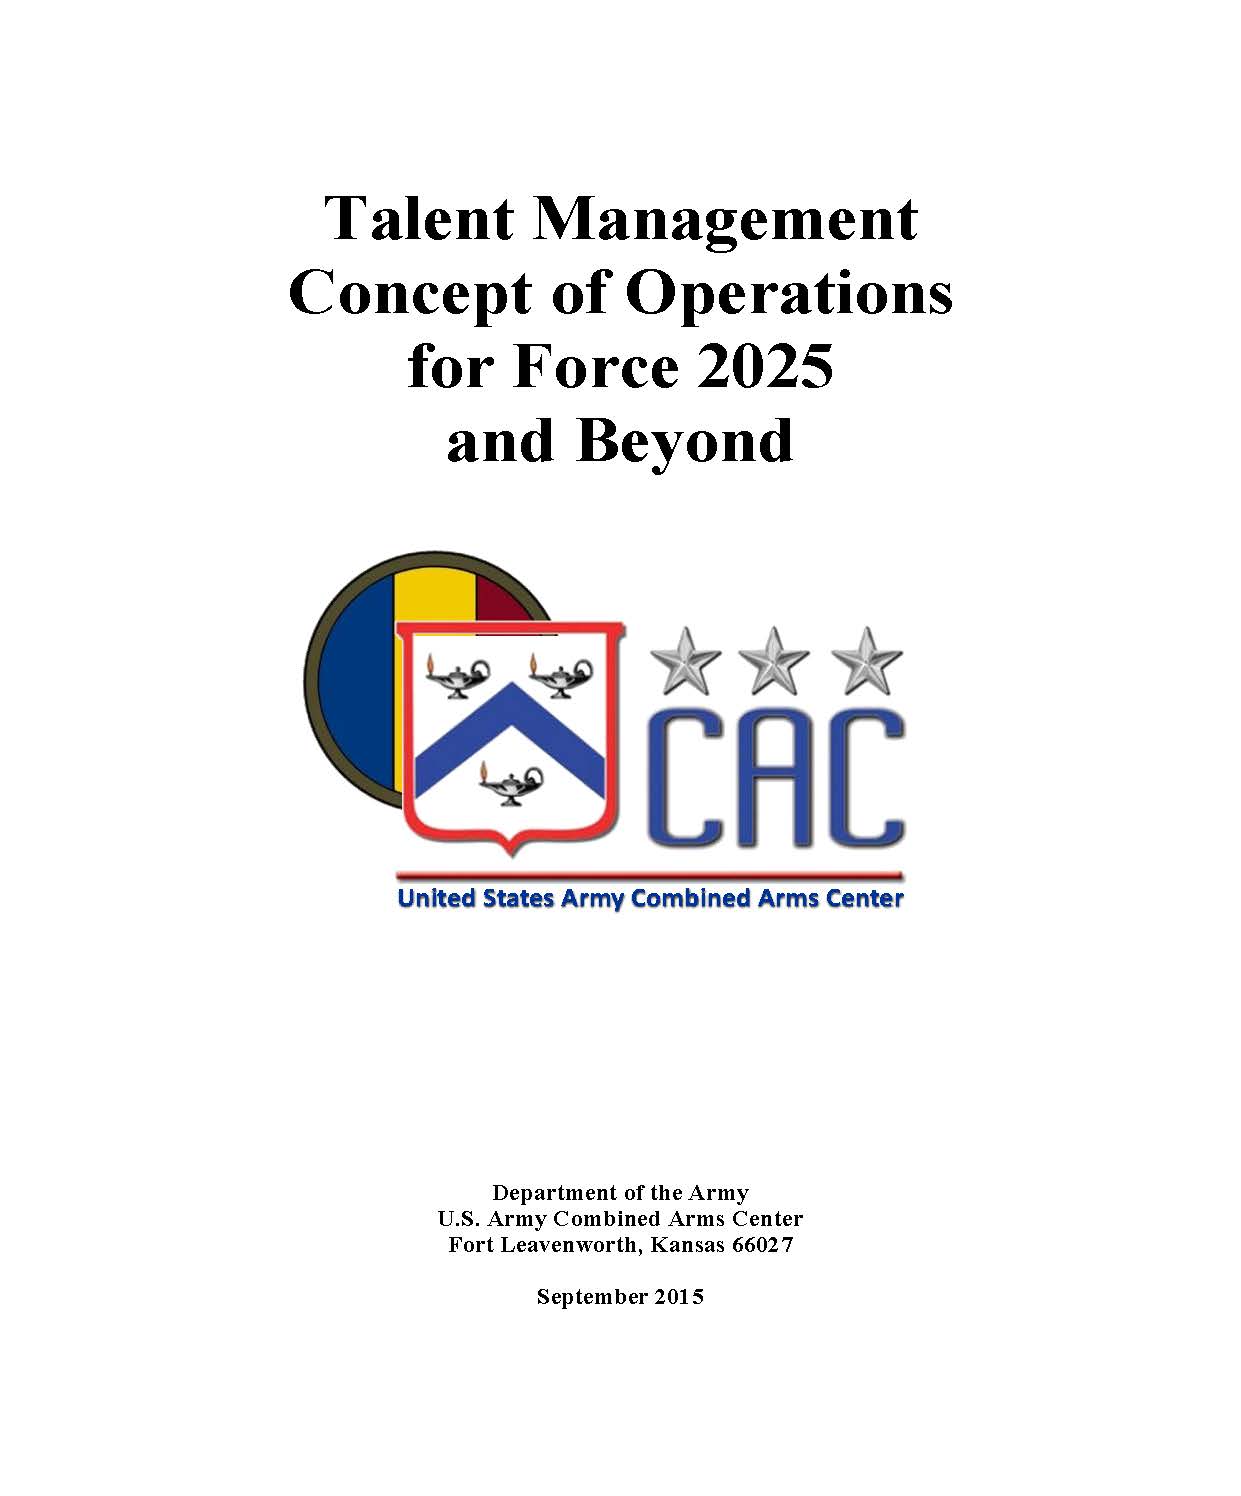 Talent Management Concept of Operations 2025